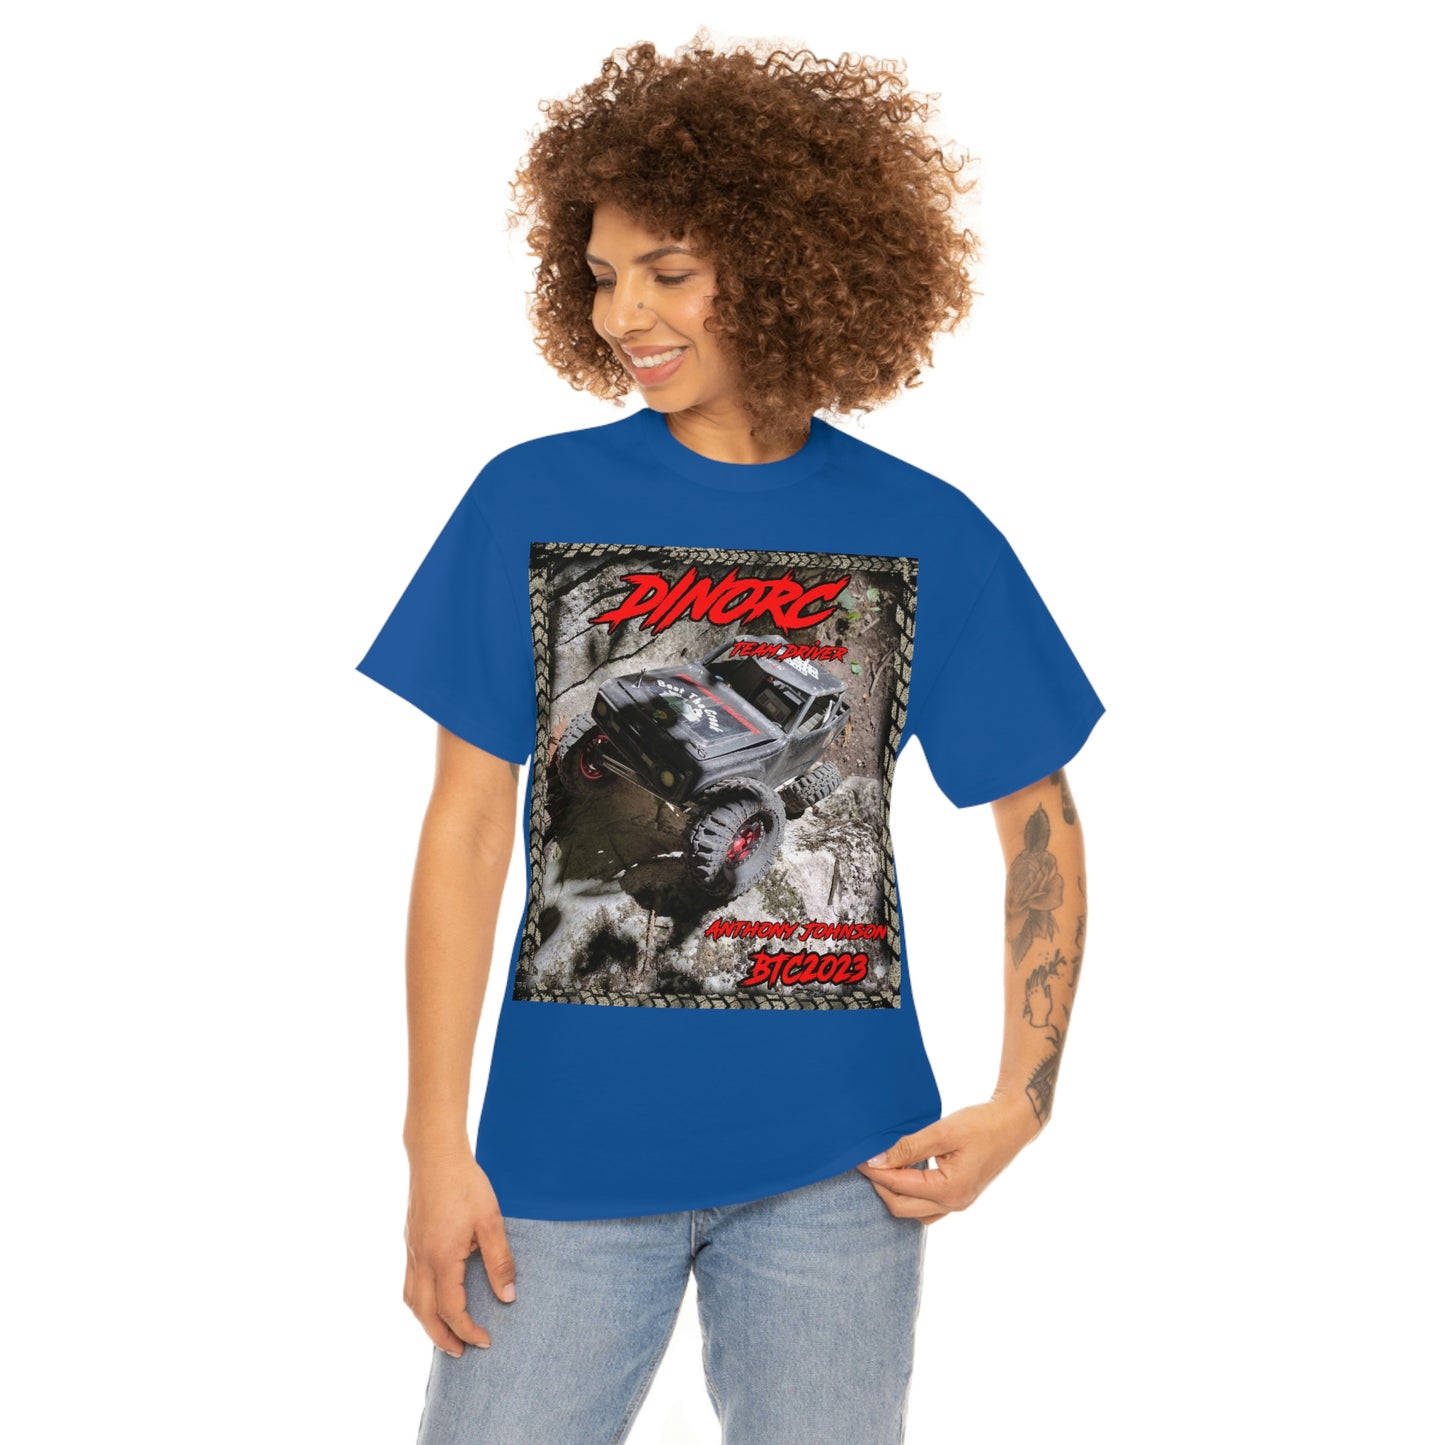 Anthony Johnson T rex  DinoRC Team Driver truck logo Front and Back DinoRc Logo T-Shirt S-5x 5 colors